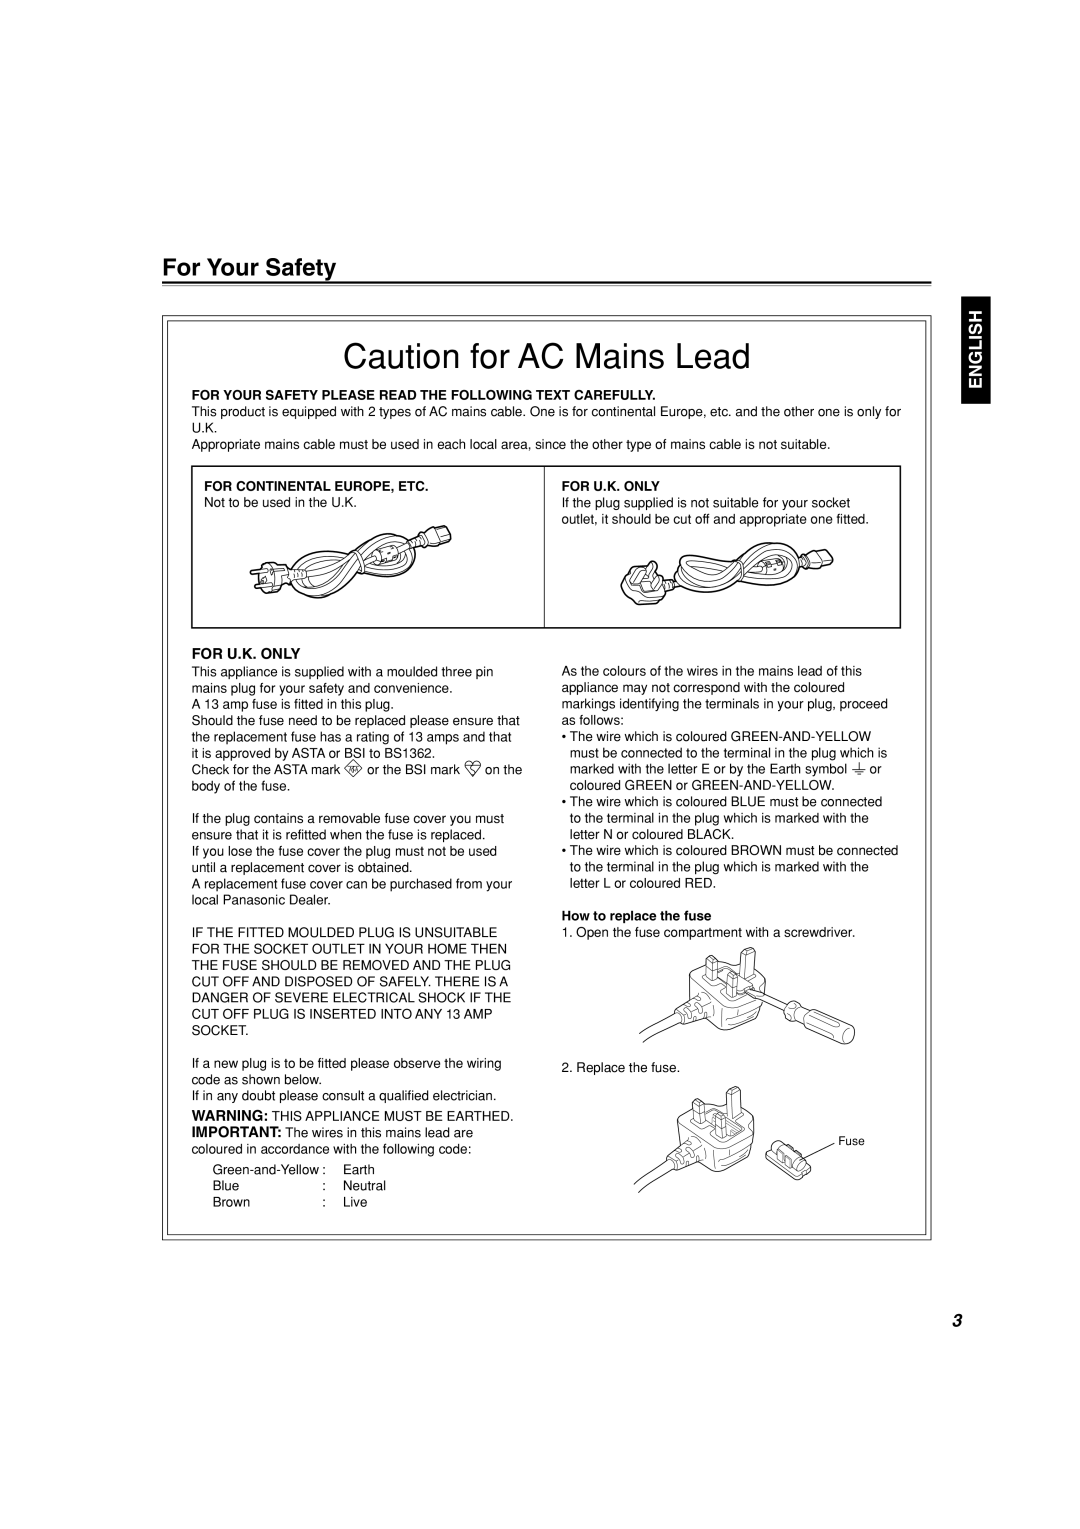 Panasonic BT-H1700AE manual Caution for AC Mains Lead, For Your Safety, English 